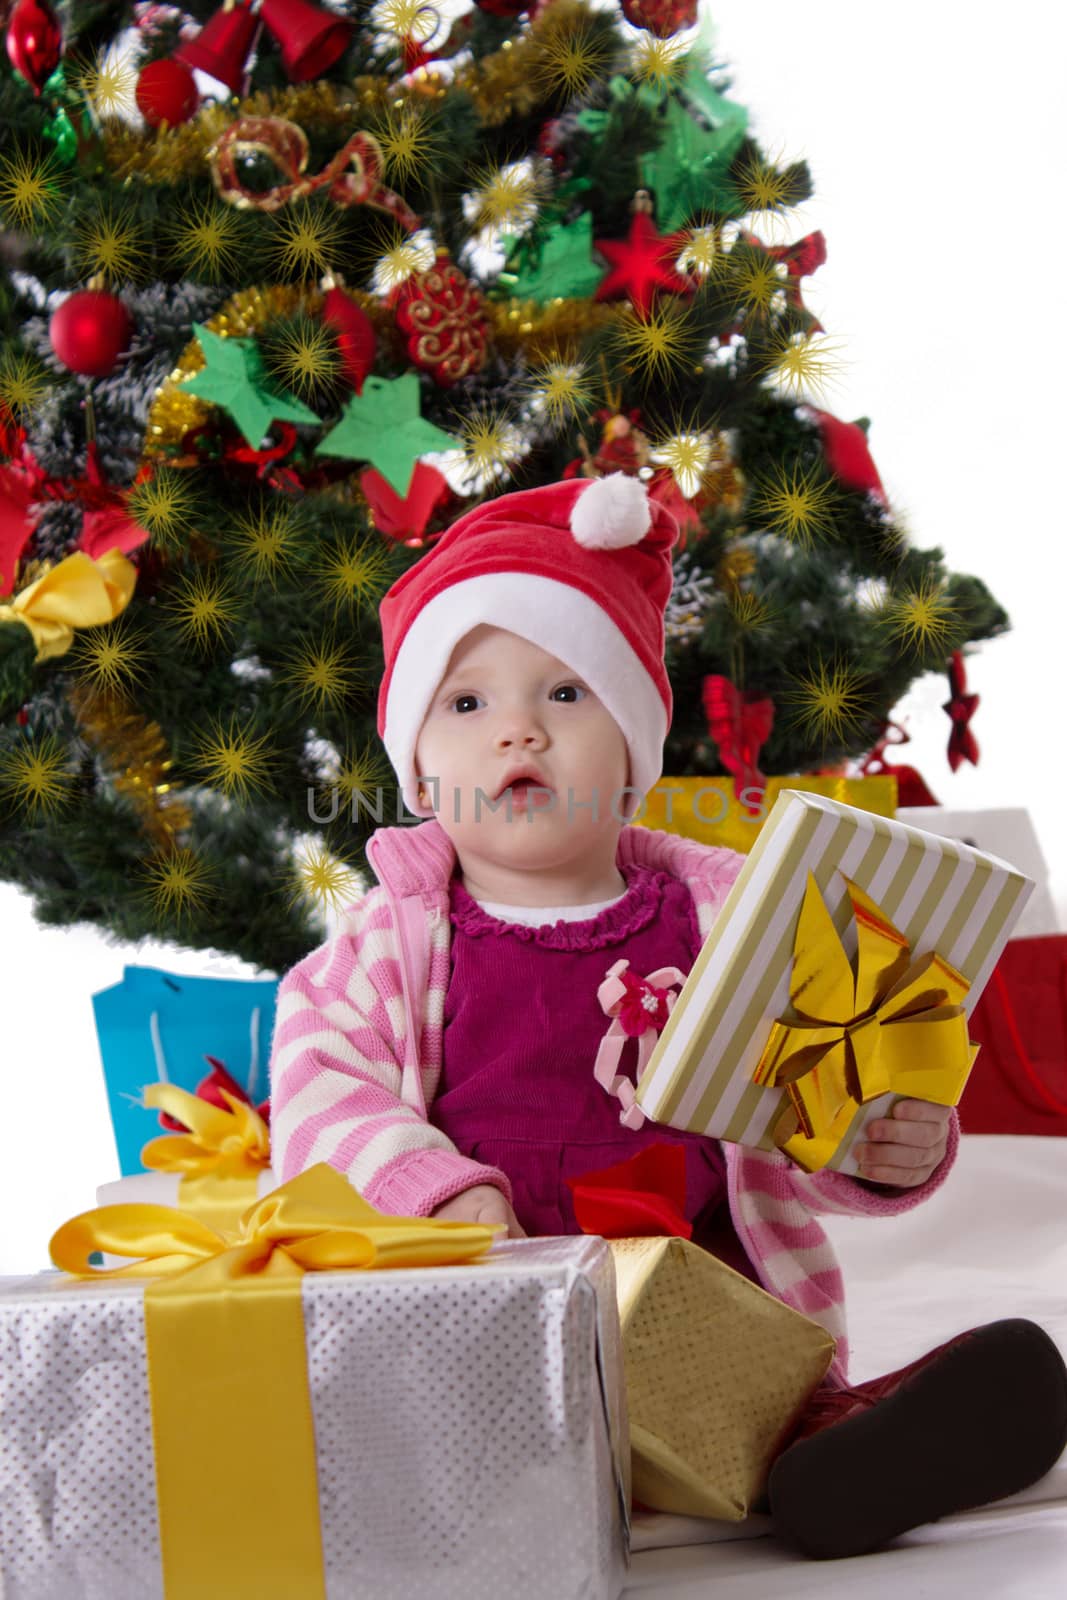 Little girl in Santa hat sitting under Christmas tree by Angel_a